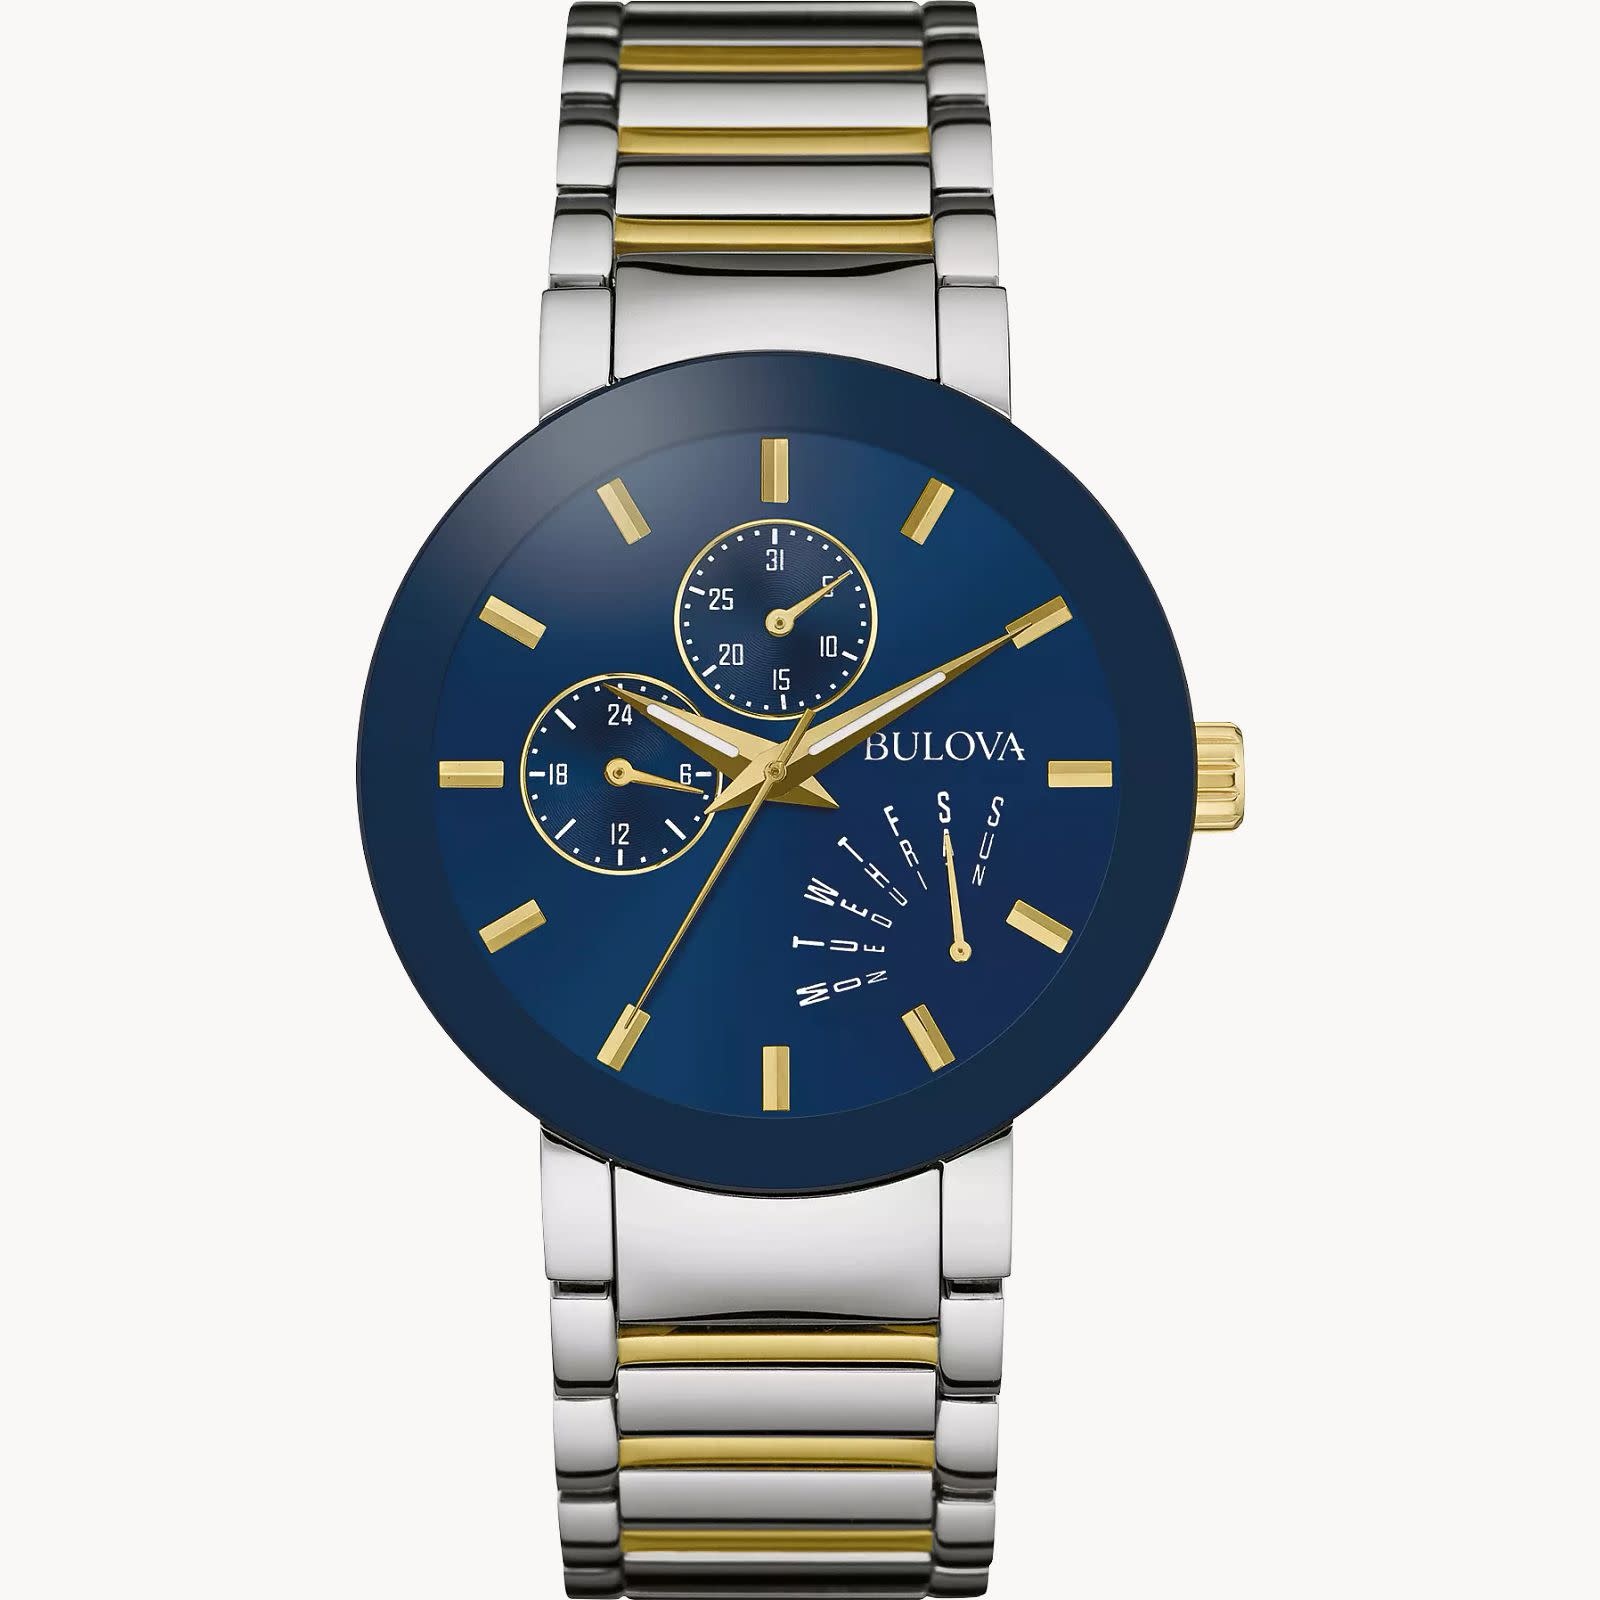 BULOVA FUTURO BLUE DIAL WITH GOLD MARKERS MENS WATCH - Gemelli Jewelers